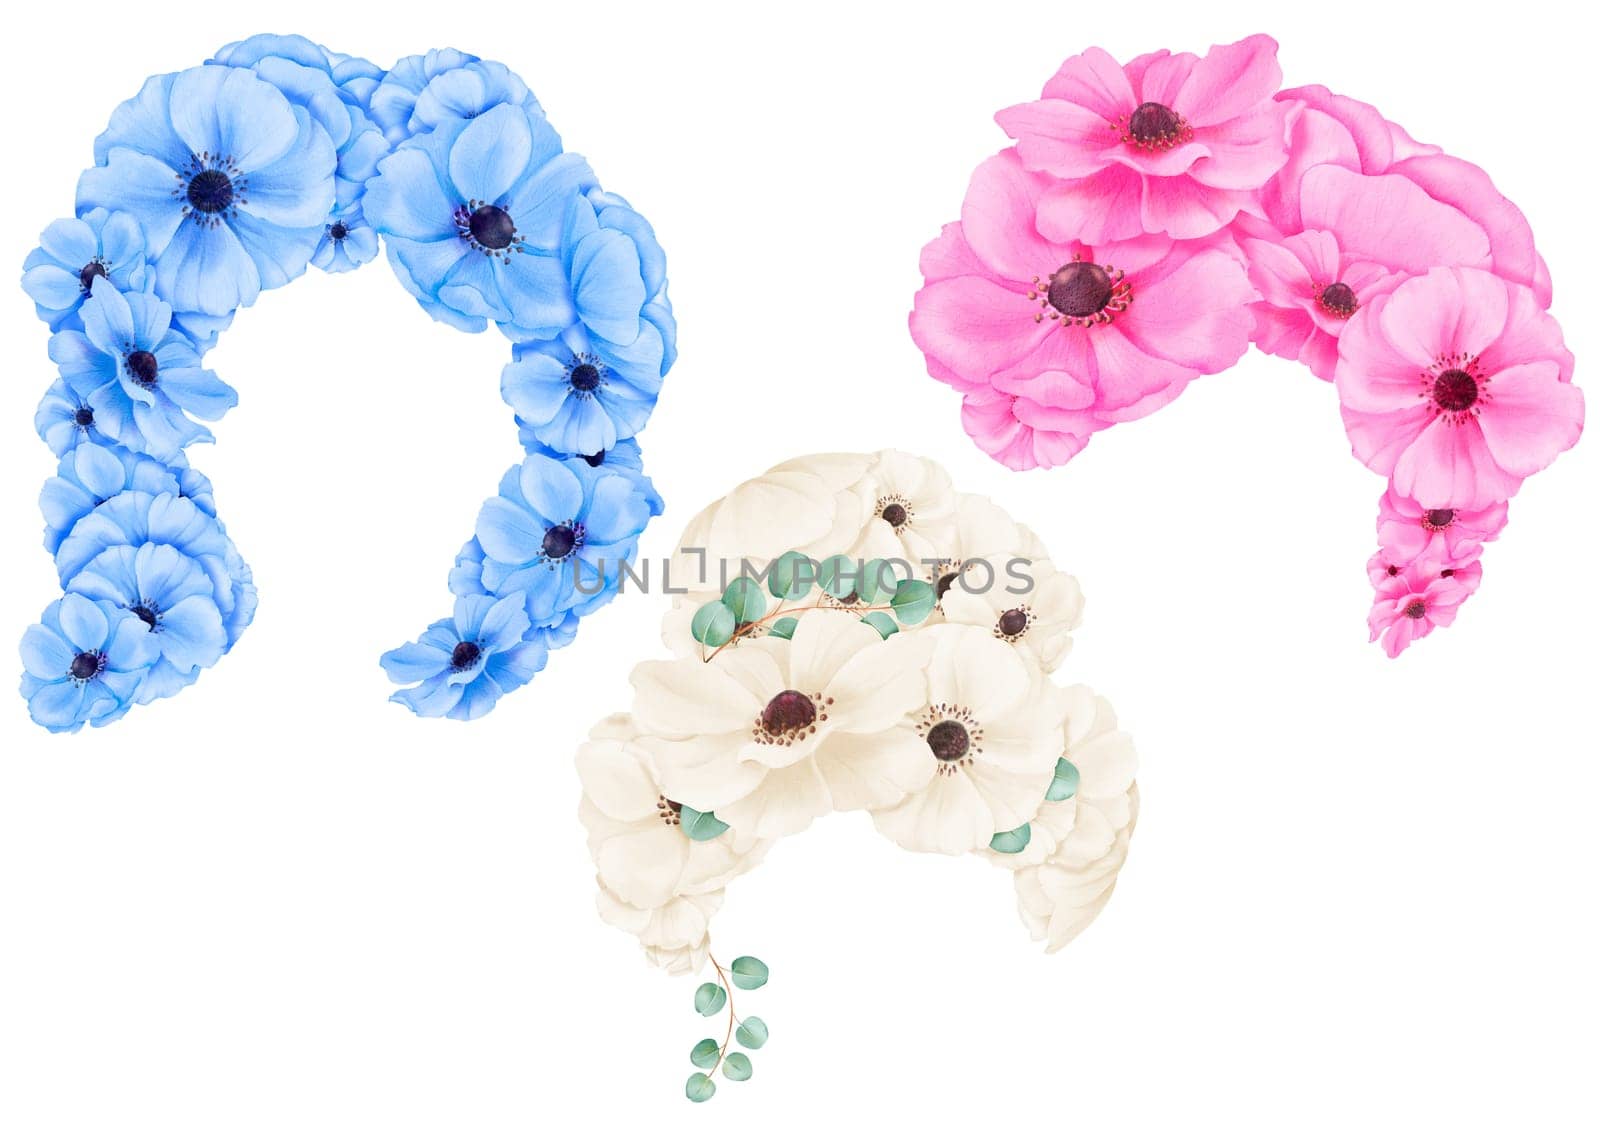 Watercolor set of hairstyles adorned with anemone flowers in various colors. Ideal for fashion illustrations, beauty magazines, wedding invitations, and floral-themed merchandise.